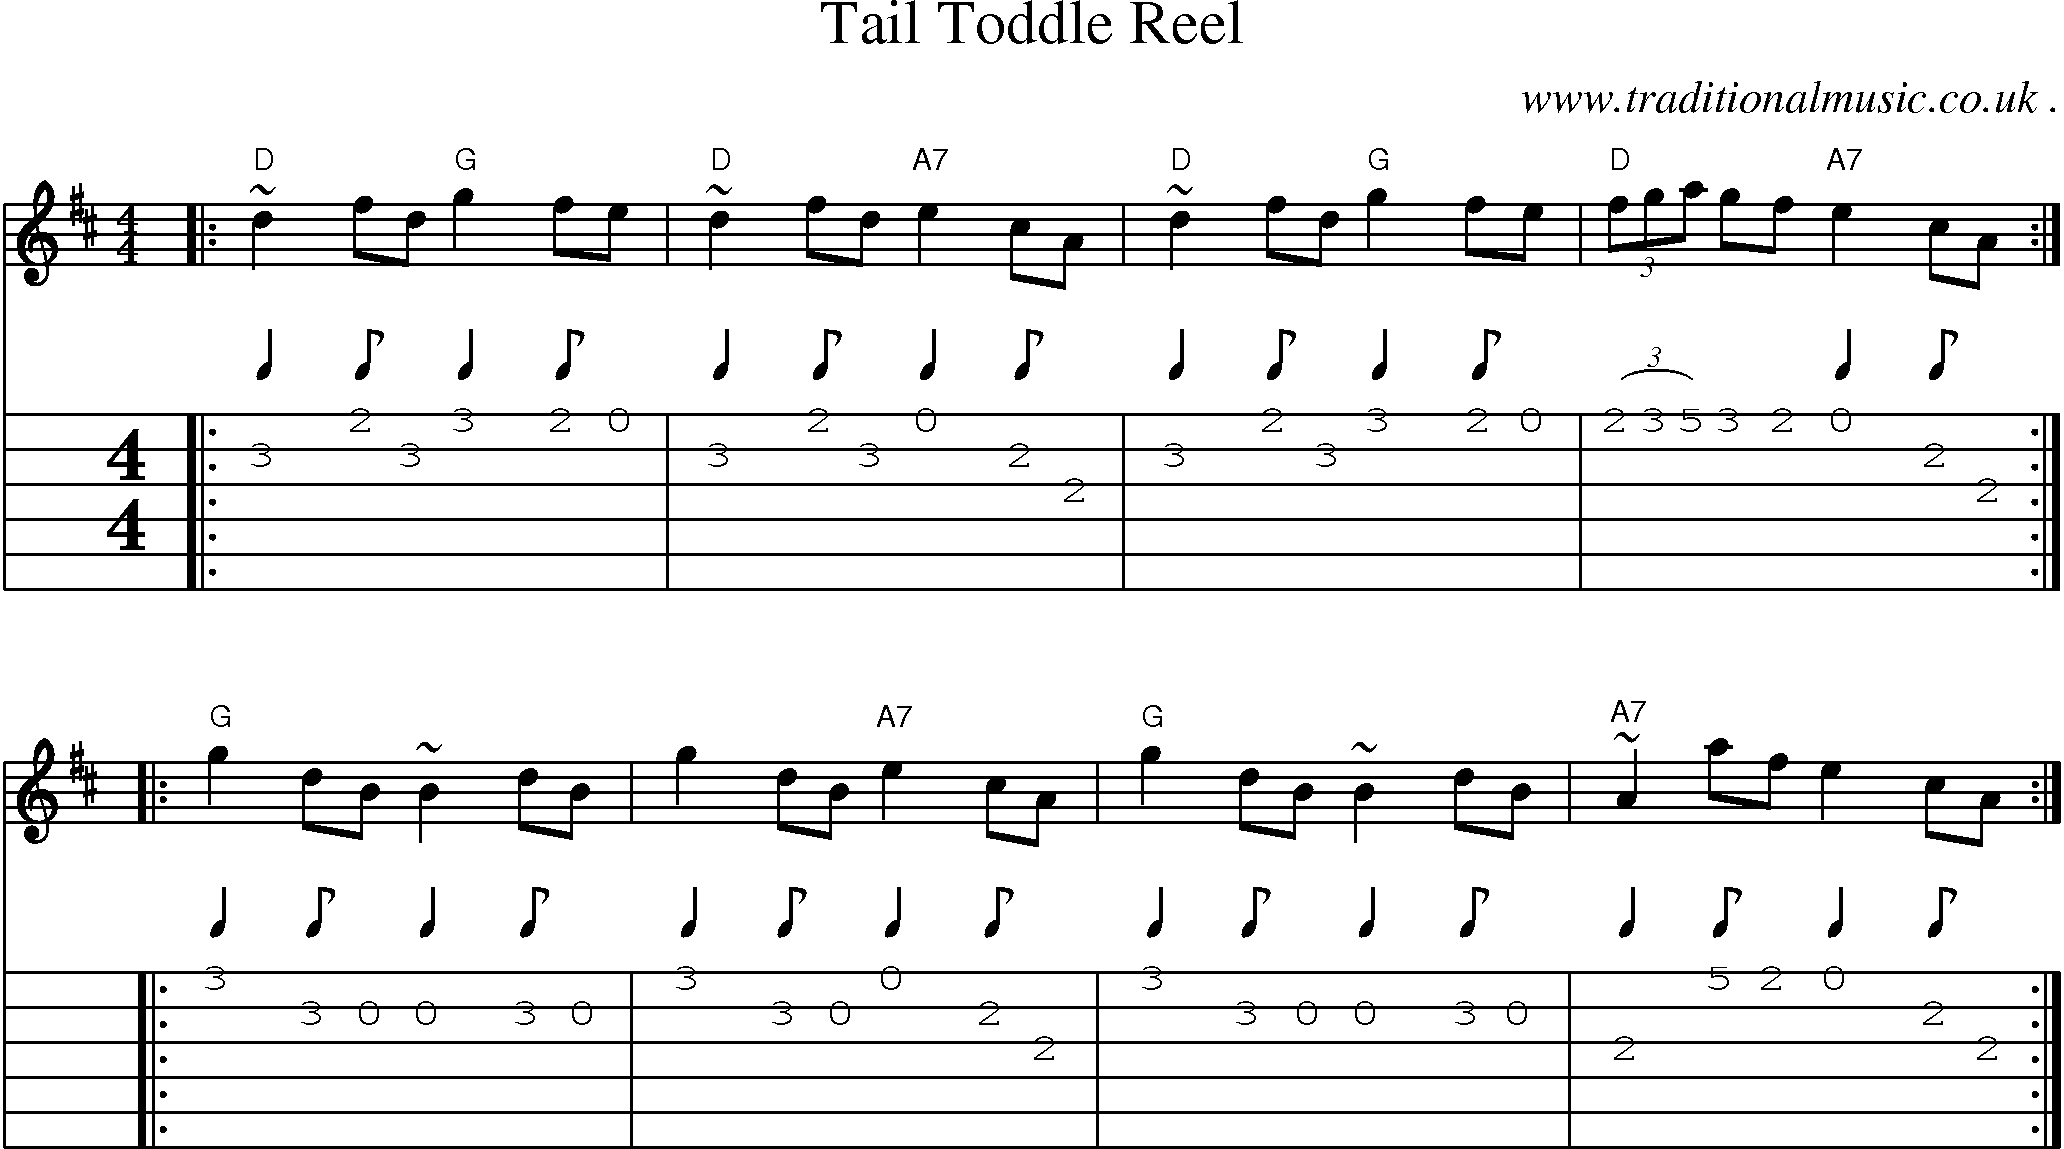 Sheet-music  score, Chords and Guitar Tabs for Tail Toddle Reel